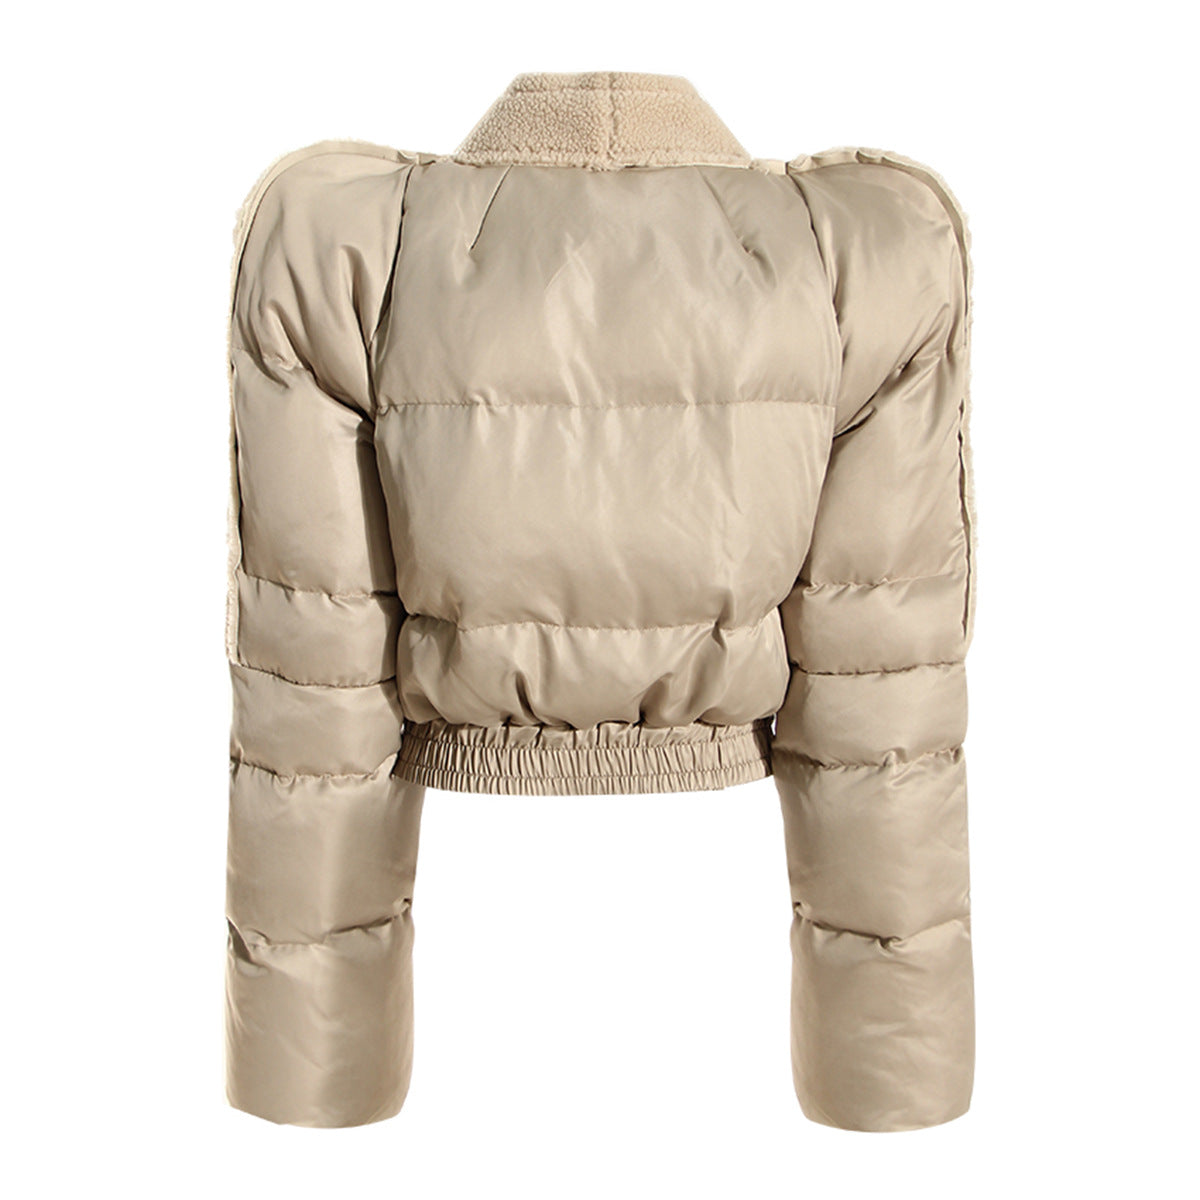 Special Interest Design Baby Cotton Coat Tower Shoulder Zipper Plush Stitching Quilted Exaggerated Profile Flying Shoulder Cotton Jacket Thick Coat